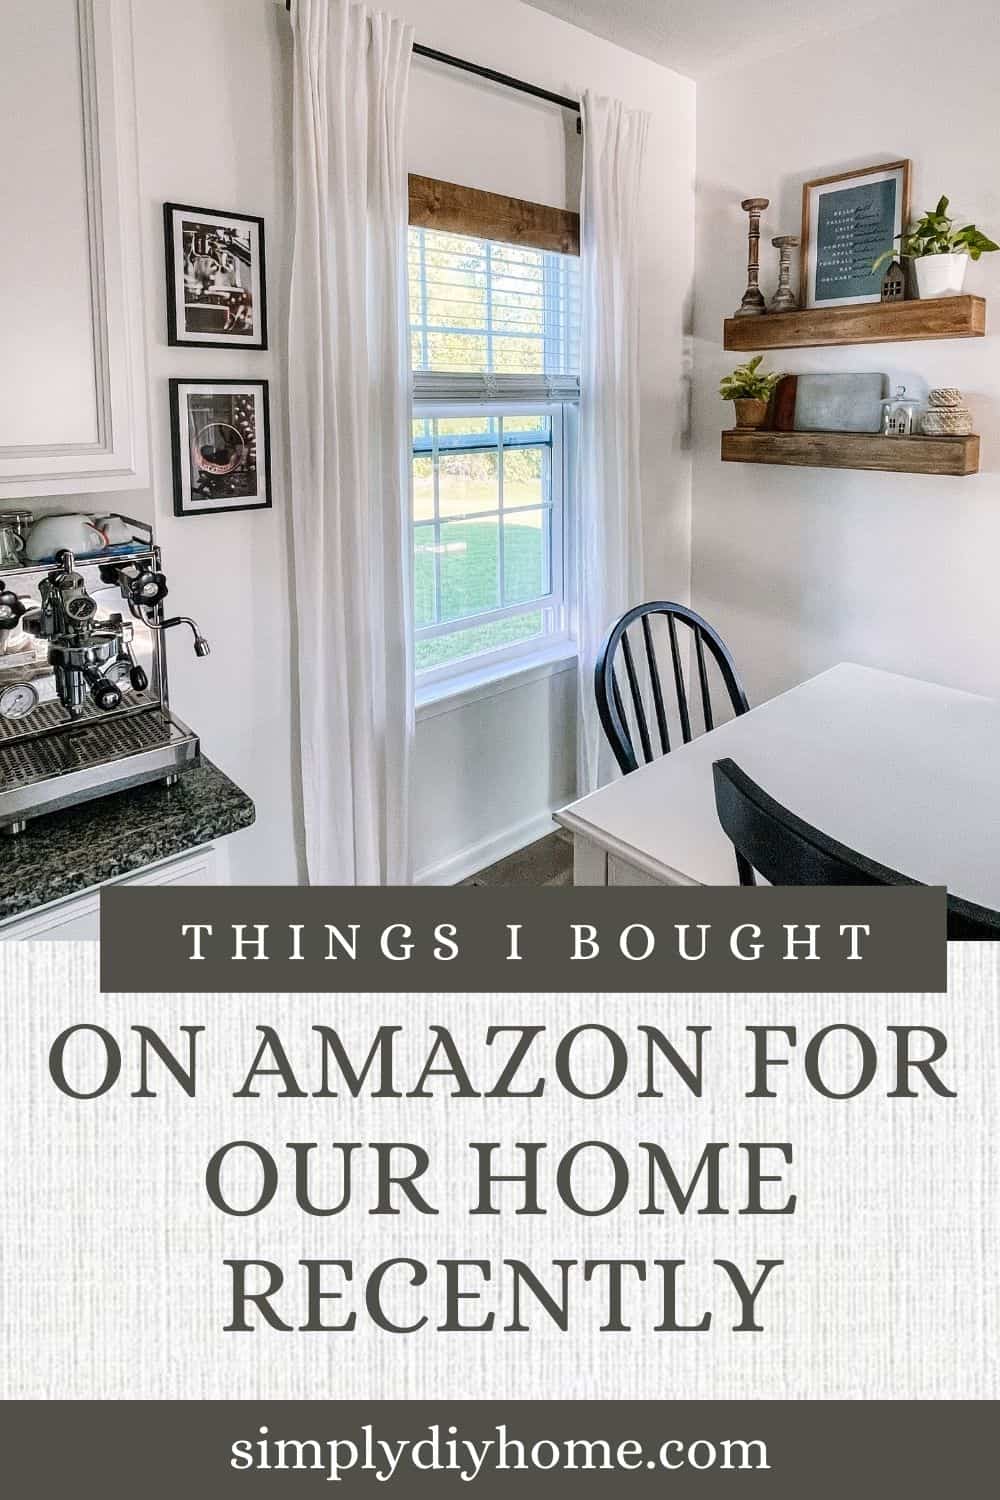 8 Things We bought on Amazon for Our Home Recently